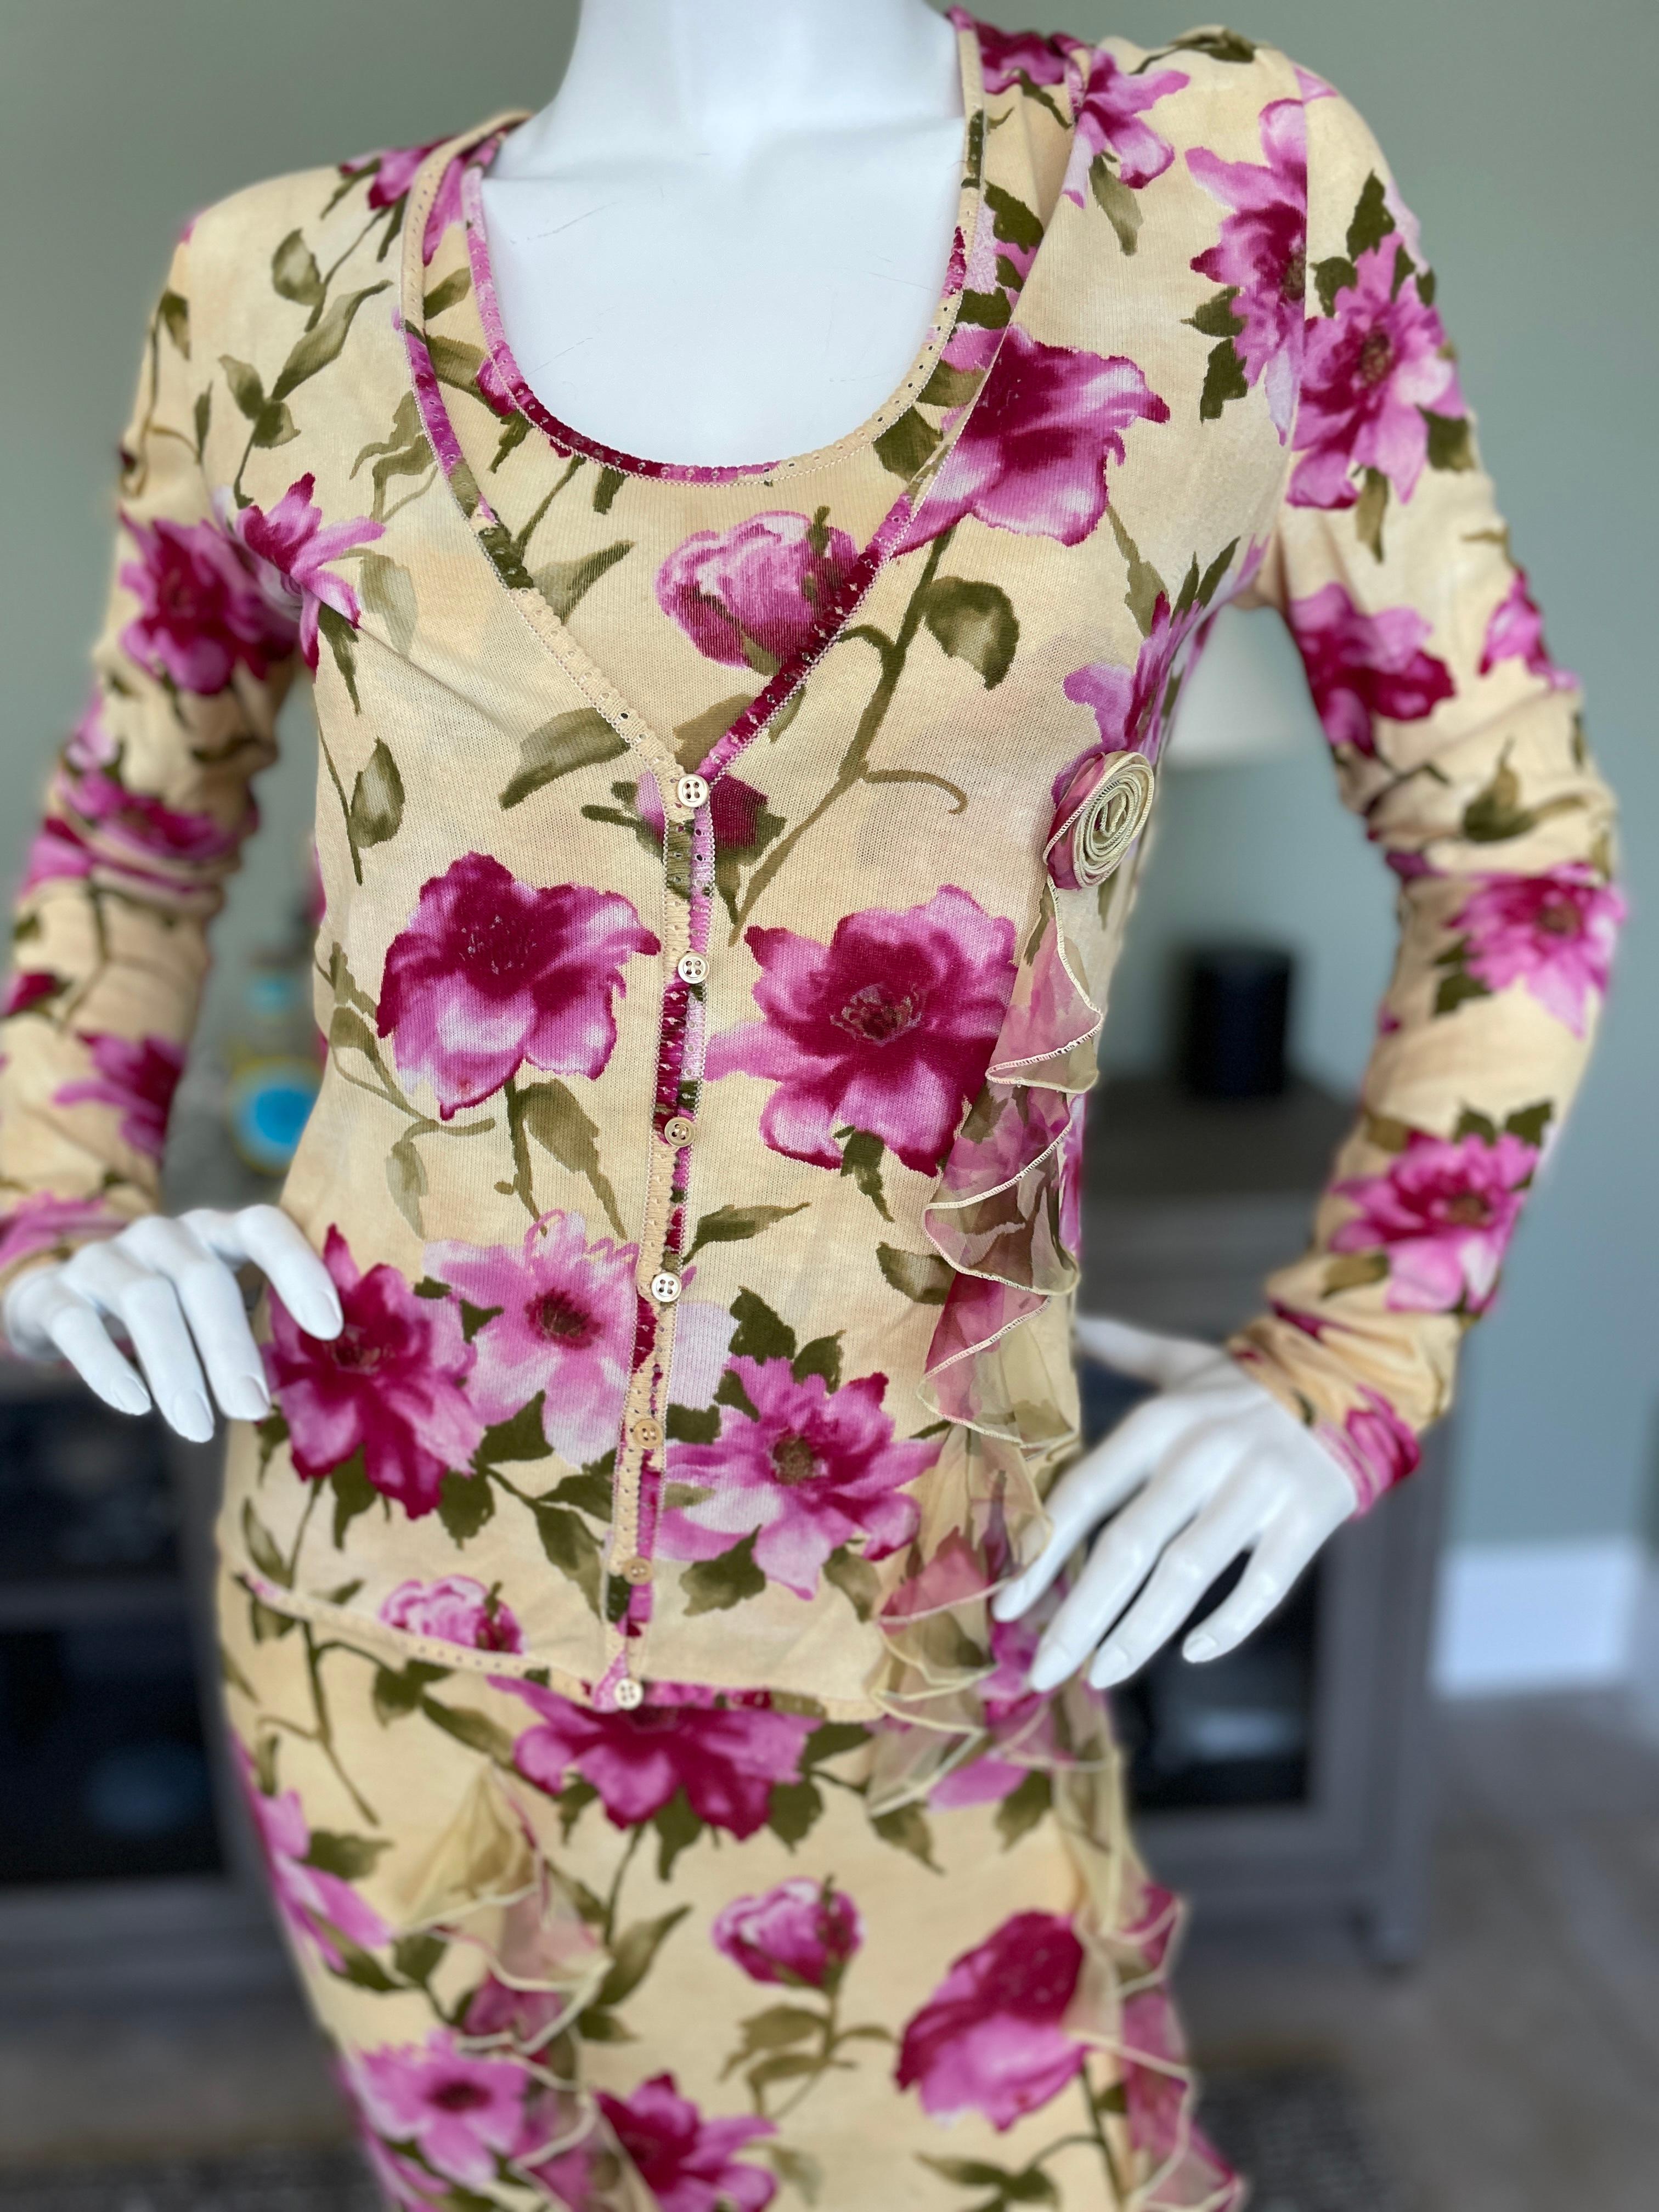 John Galliano Vintage Floral Print Cocktail Dress with Matching Cardigan Sweater In Excellent Condition For Sale In Cloverdale, CA